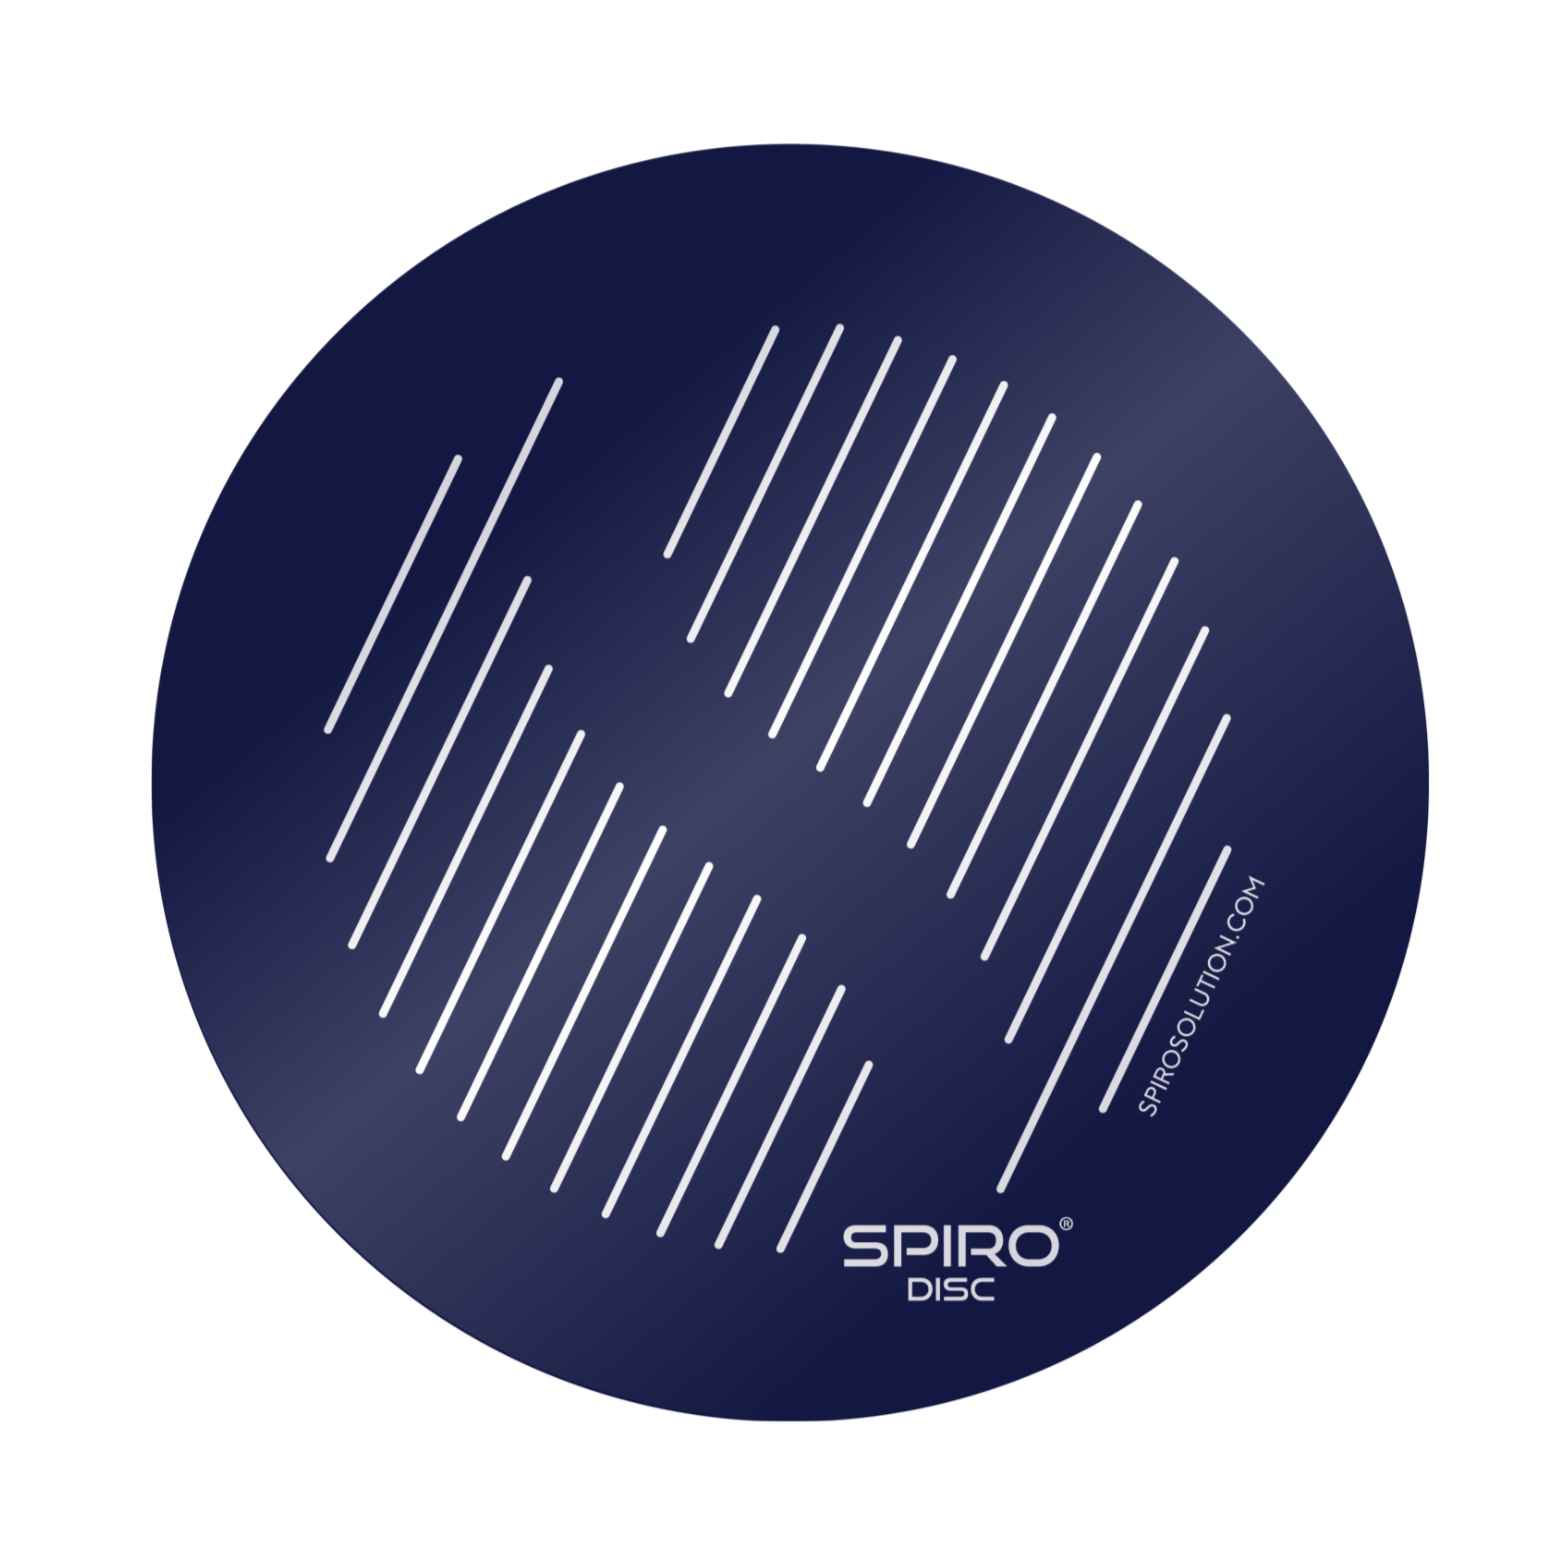 5. SPIRO® DISC – Multipurpose Electromagnetic Filter: Spaces, Appliances, and Structured Water